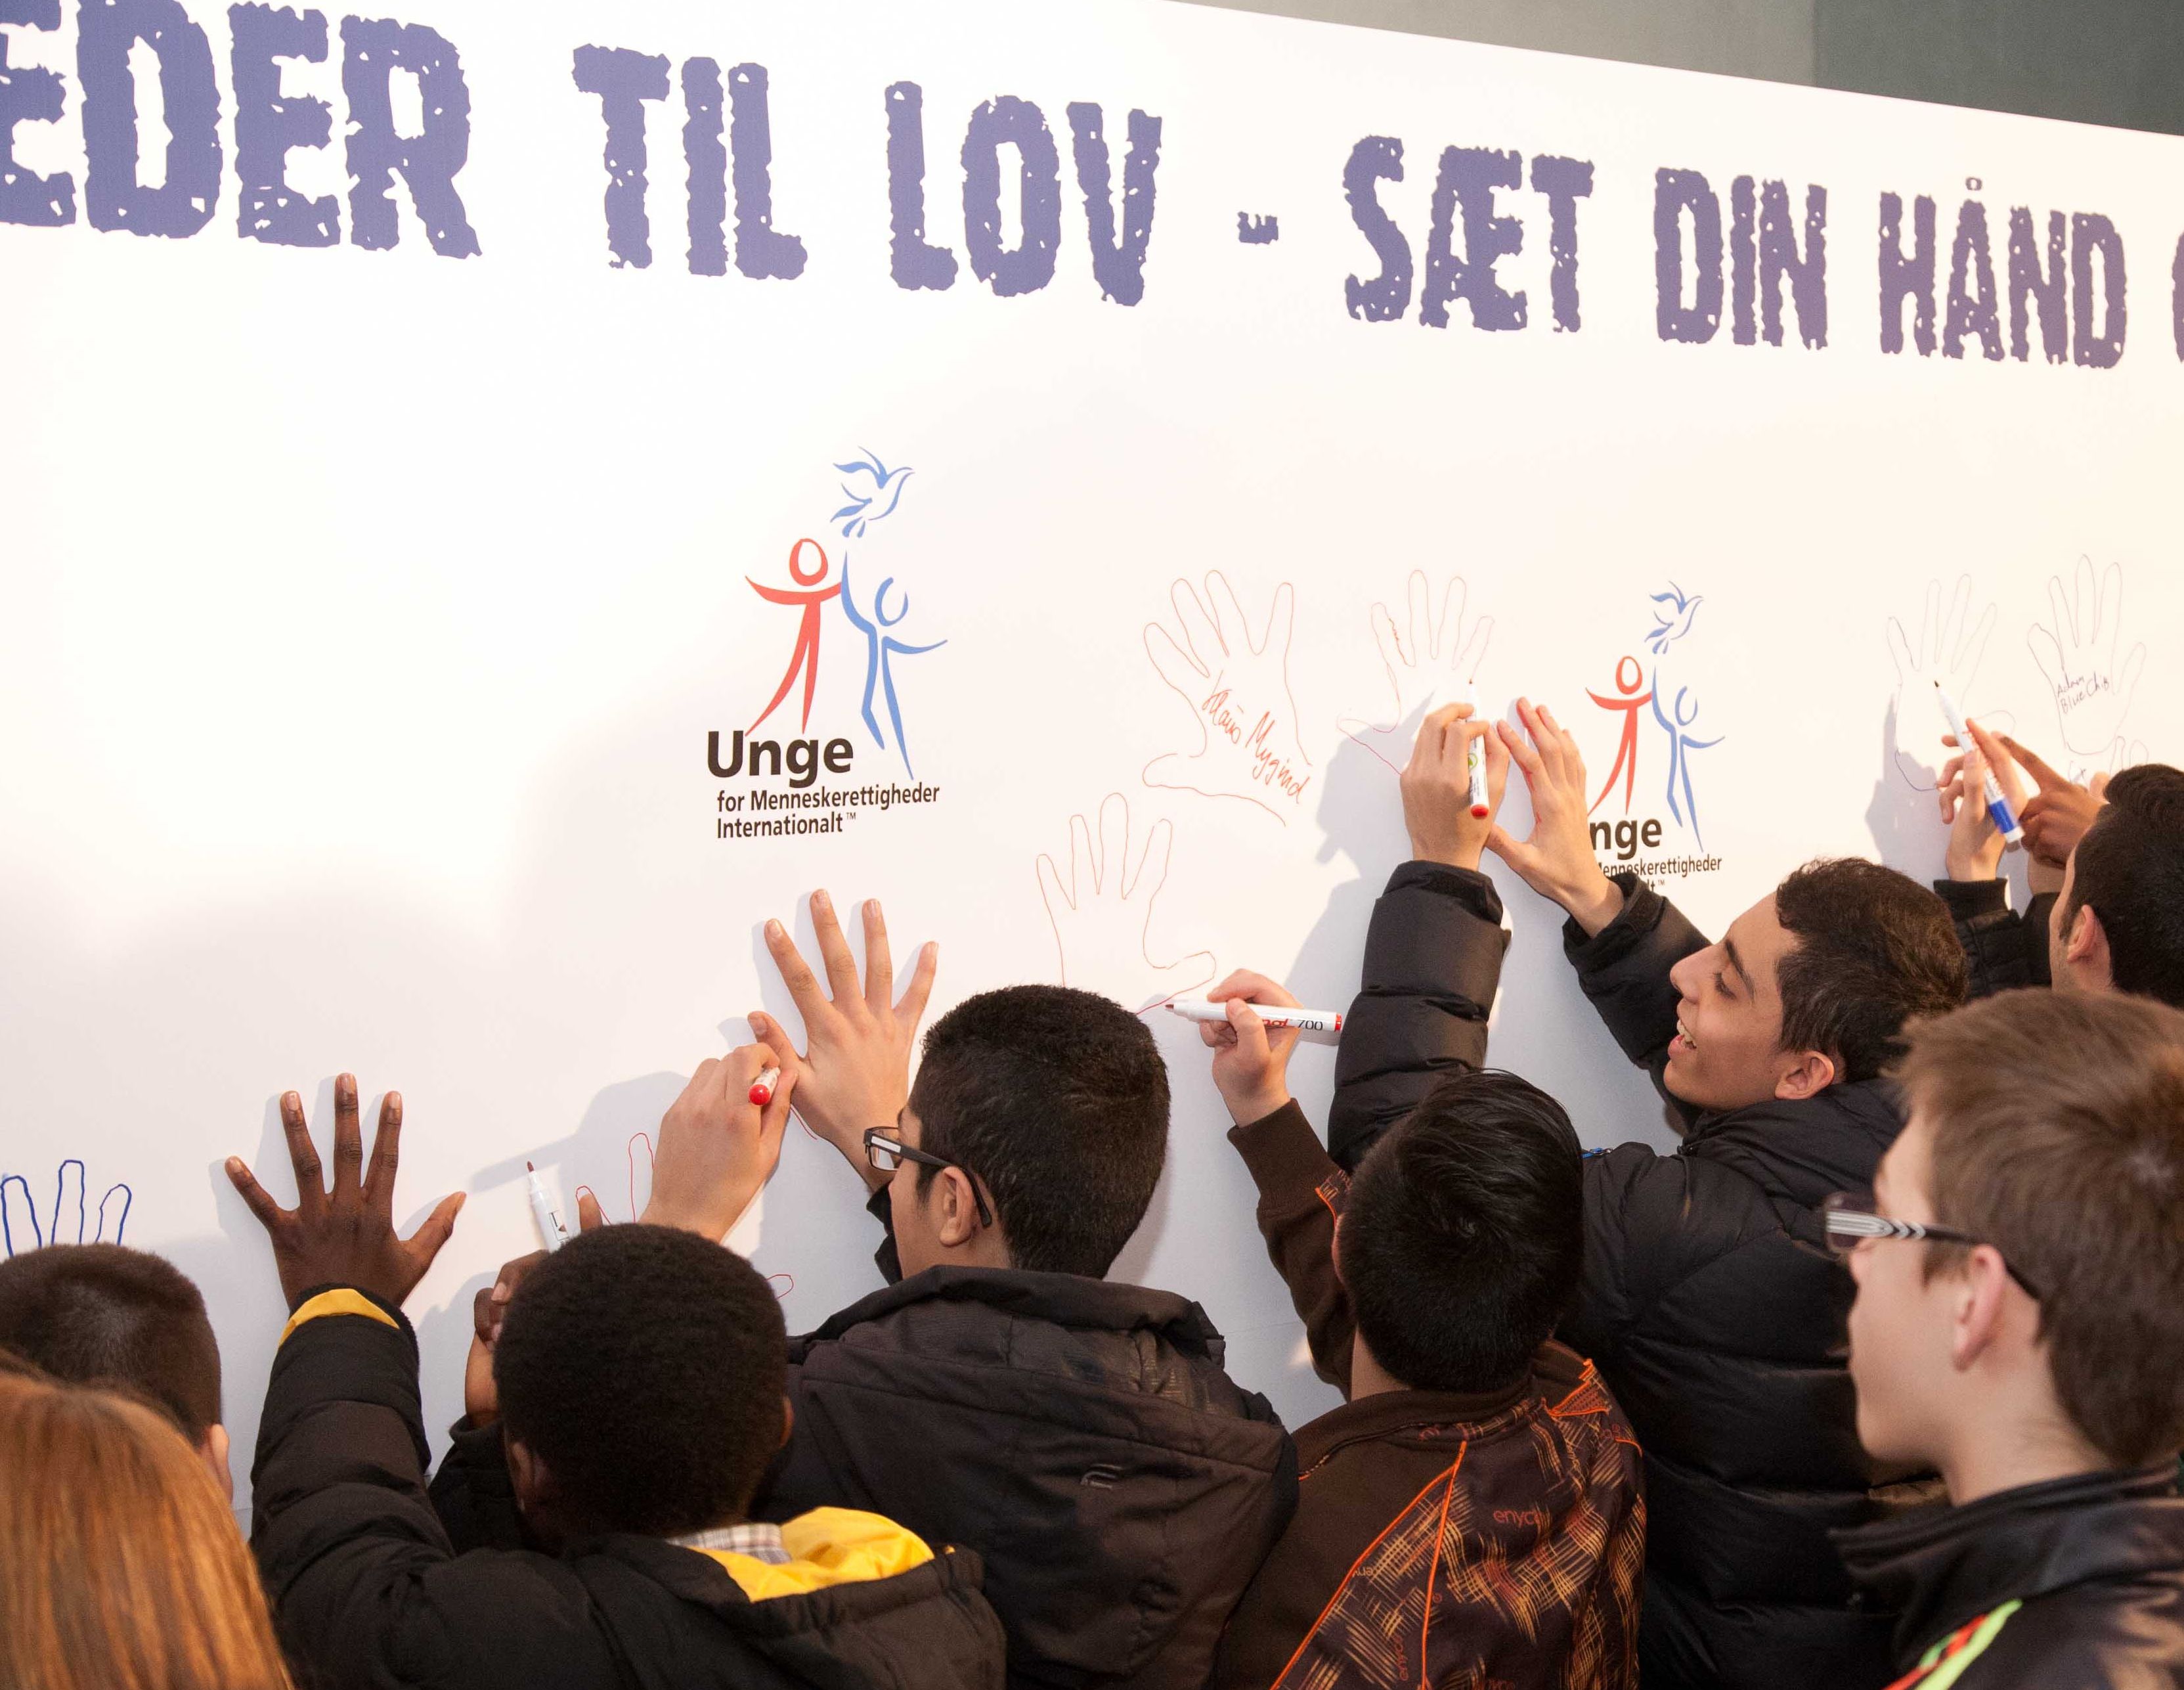 Youth traced their hands and wrote personal human rights messages on a mural to affirm their commitment to making human rights a fact.